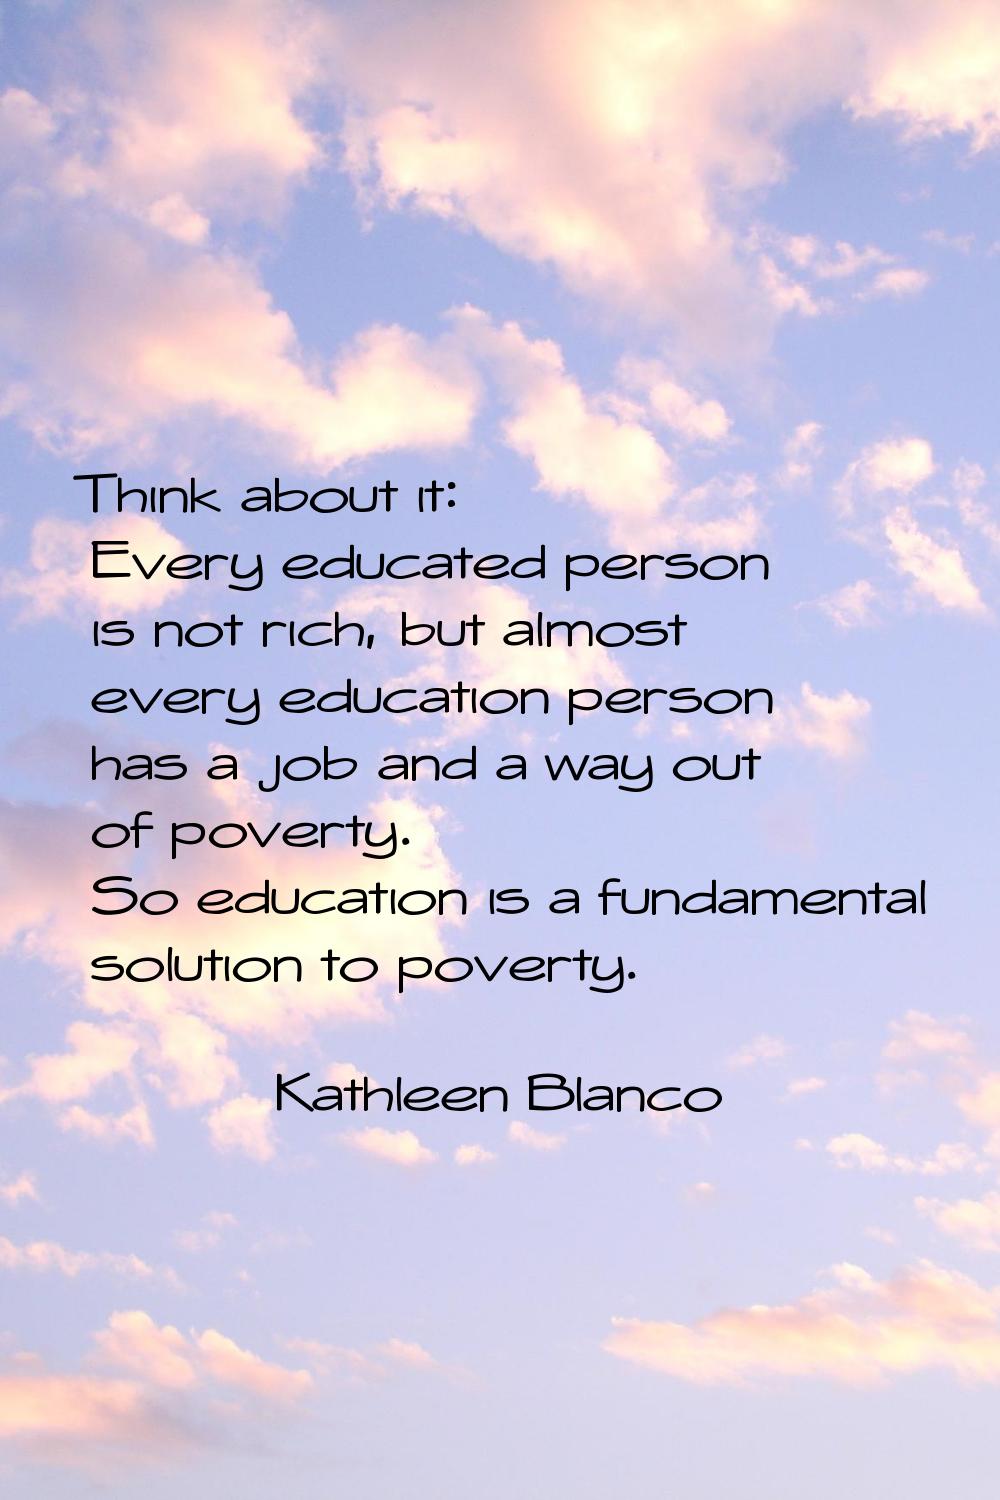 Think about it: Every educated person is not rich, but almost every education person has a job and 